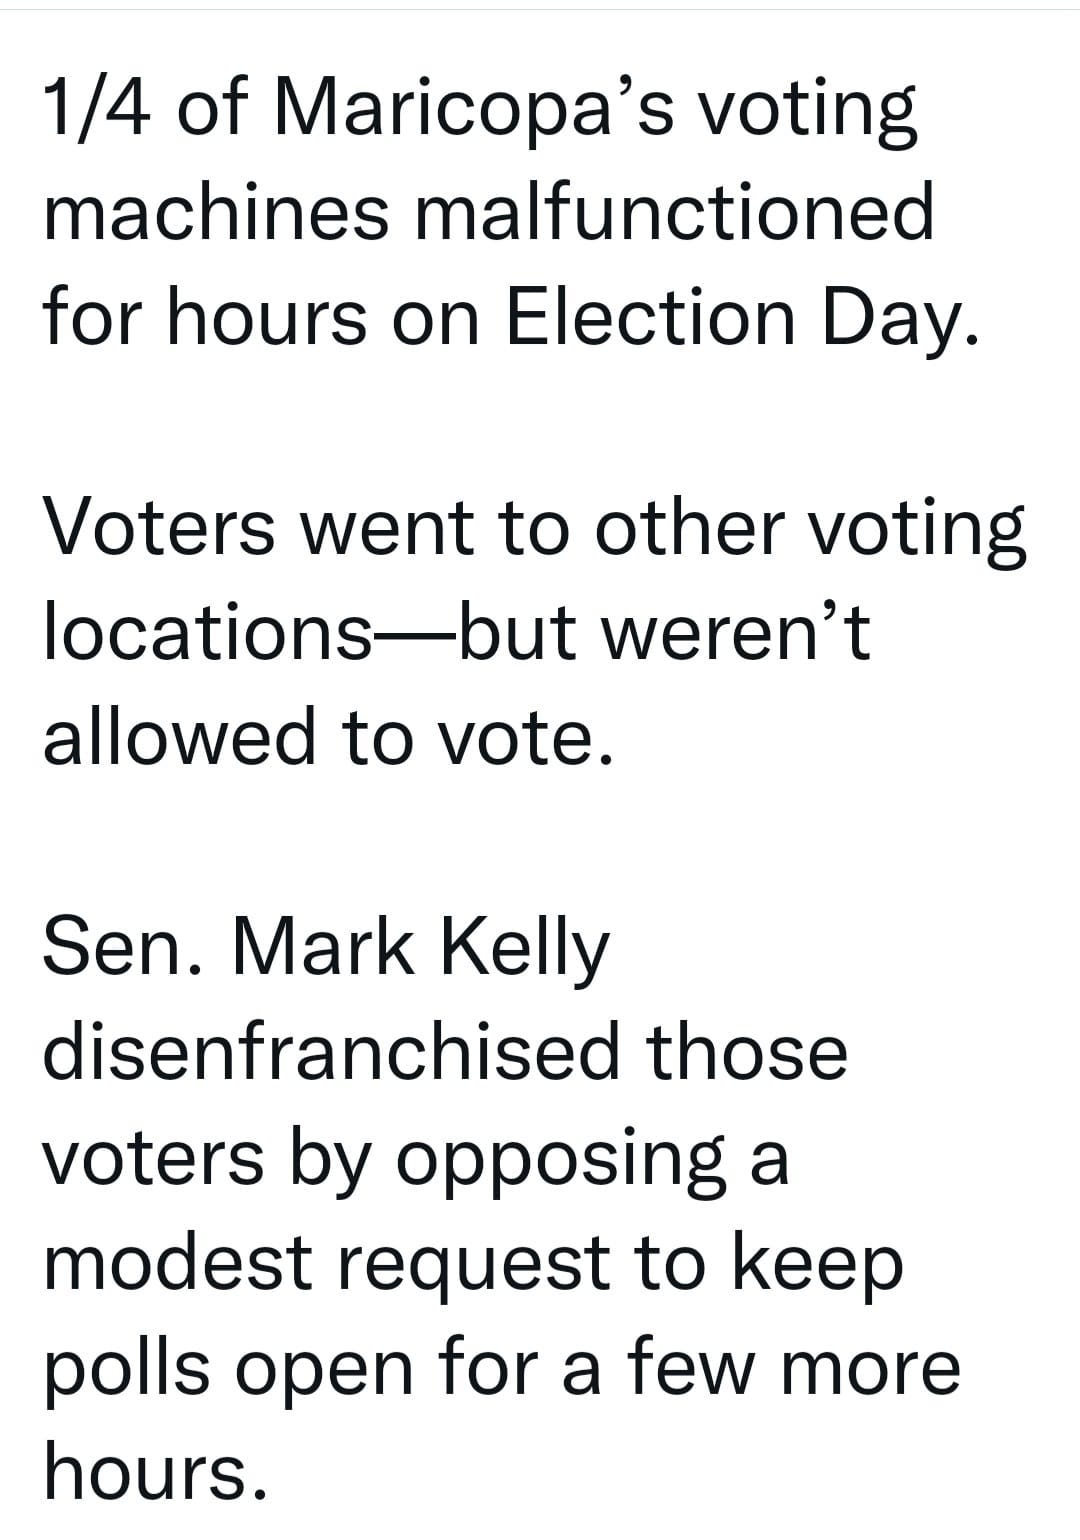 May be an image of text that says '1/4 of Maricopa's voting machines malfunctioned for hours on Election Day. Voters went to other voting locations- but weren't allowed to vote. Sen. Mark Kelly disenfranchised those voters by opposing a modest request to keep polls open for a few more hours.'